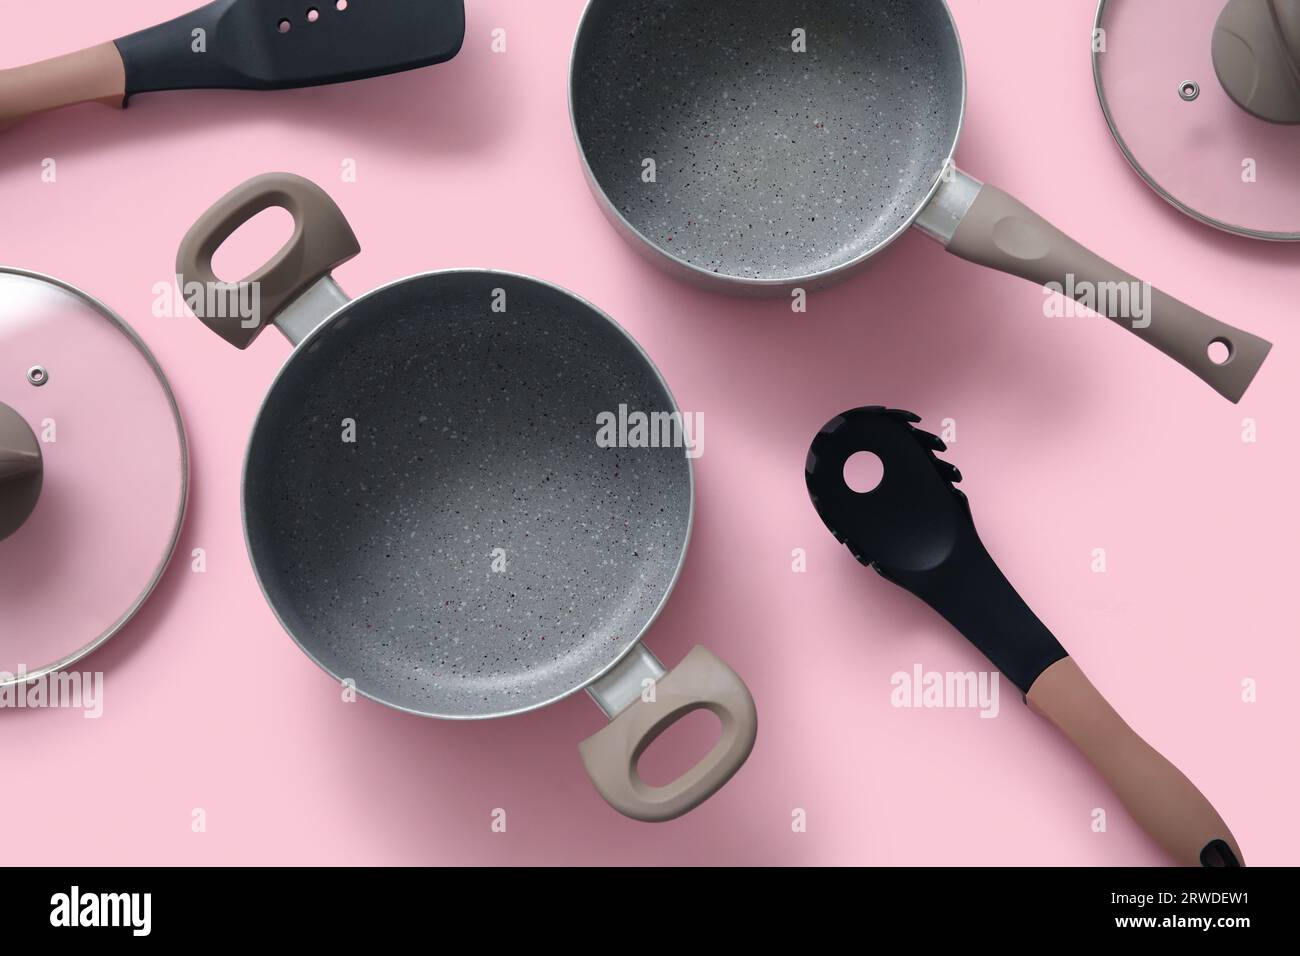 Cooking pots and kitchen utensils on pink background Stock Photo